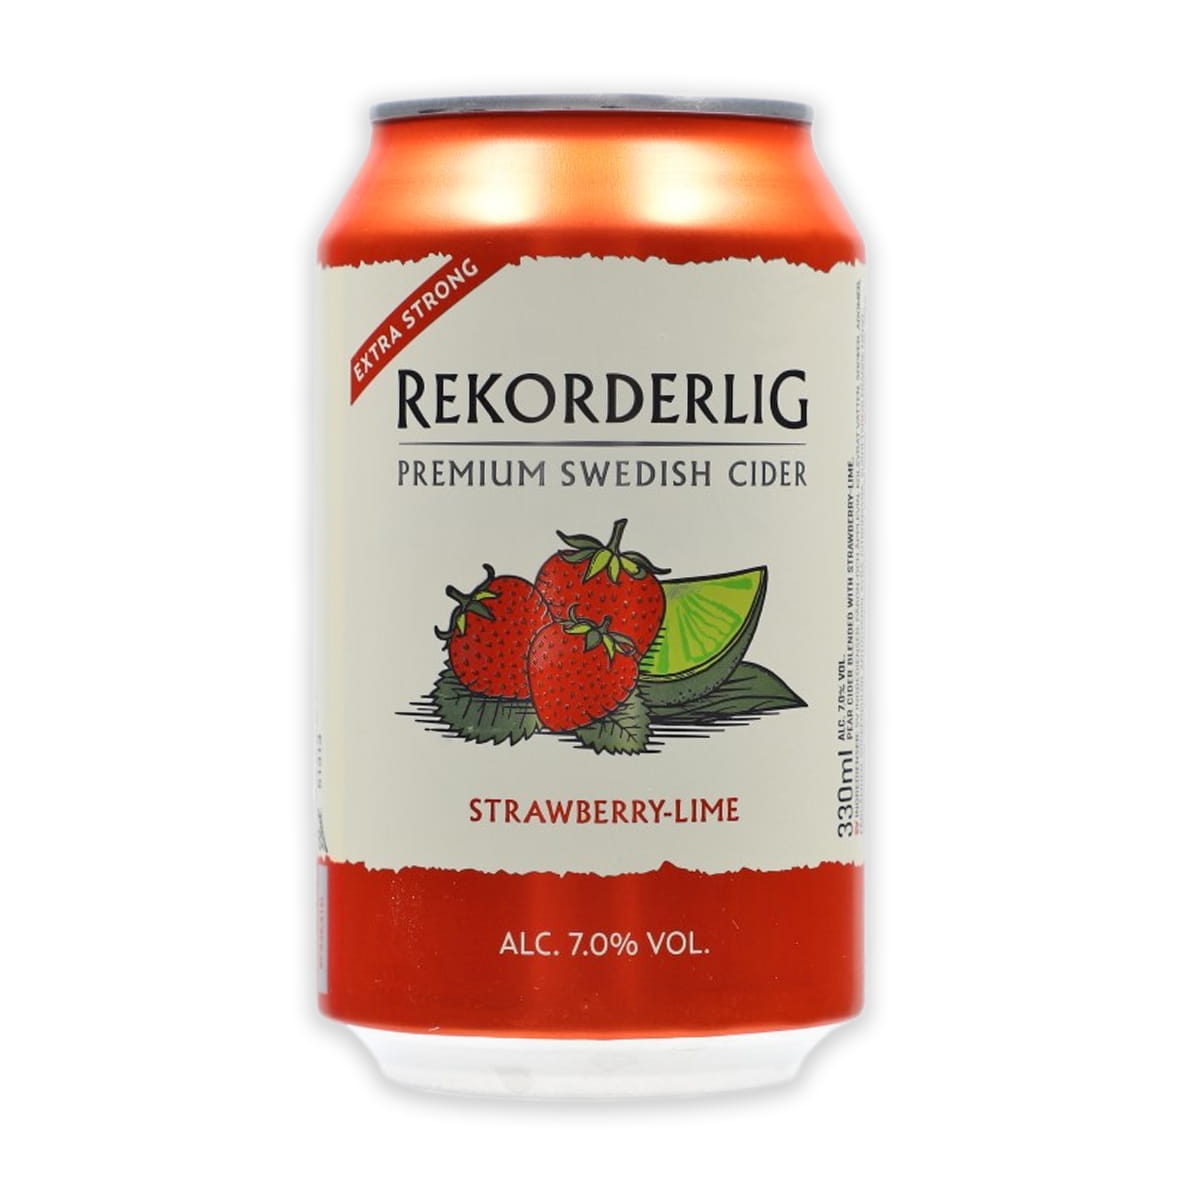 Rekorderlig  Strawberry-Lime extra strong (1 x 0.33 l)